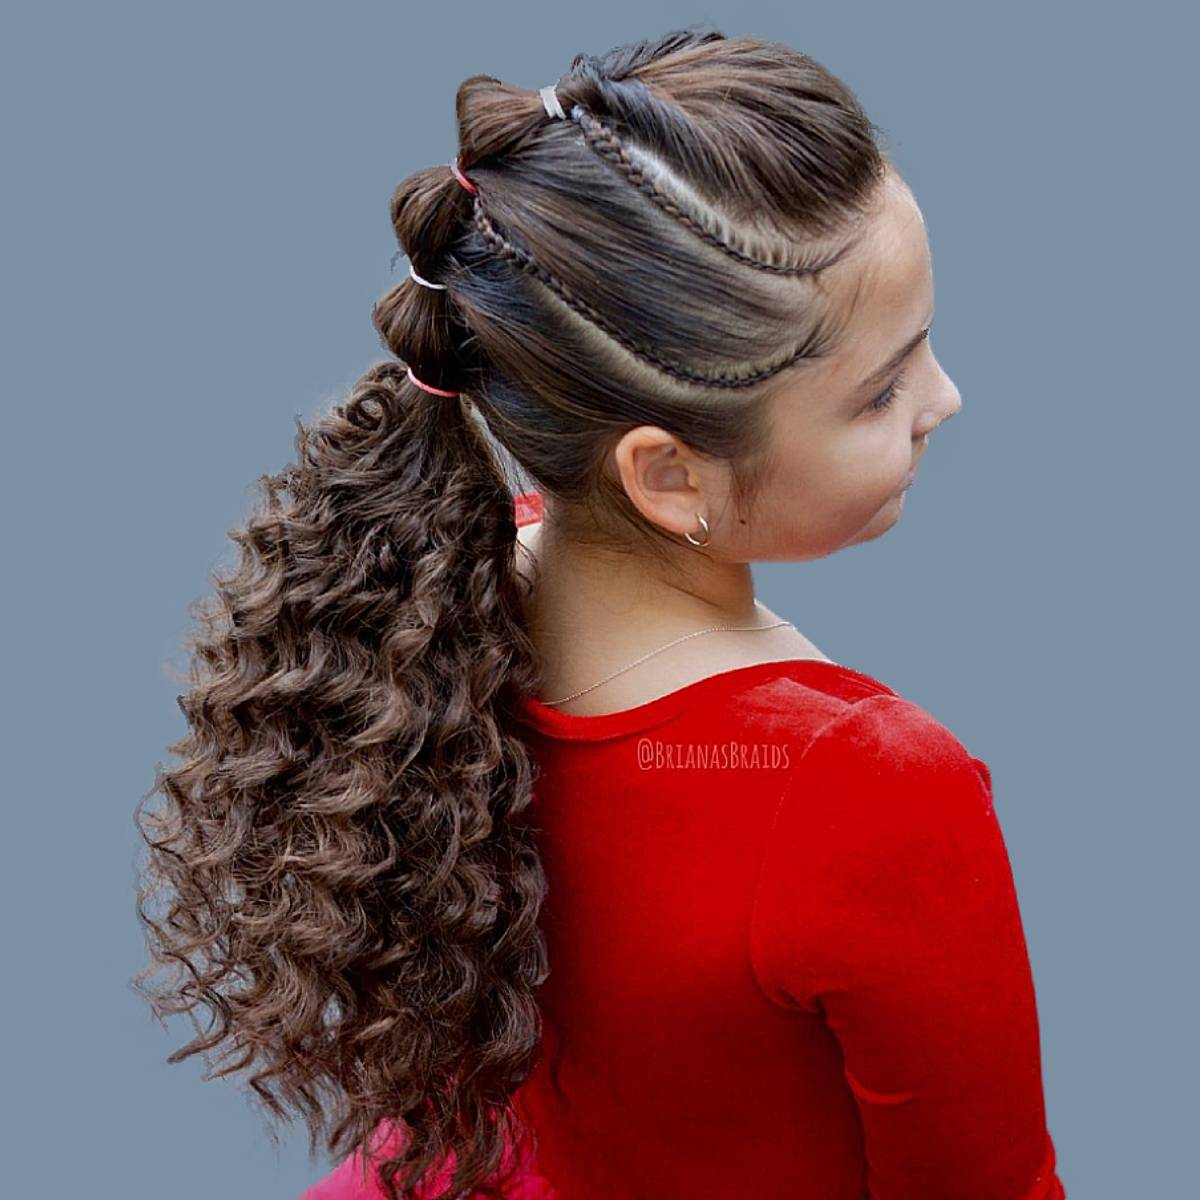 55,463 Girl Hairstyle Back Images, Stock Photos & Vectors | Shutterstock